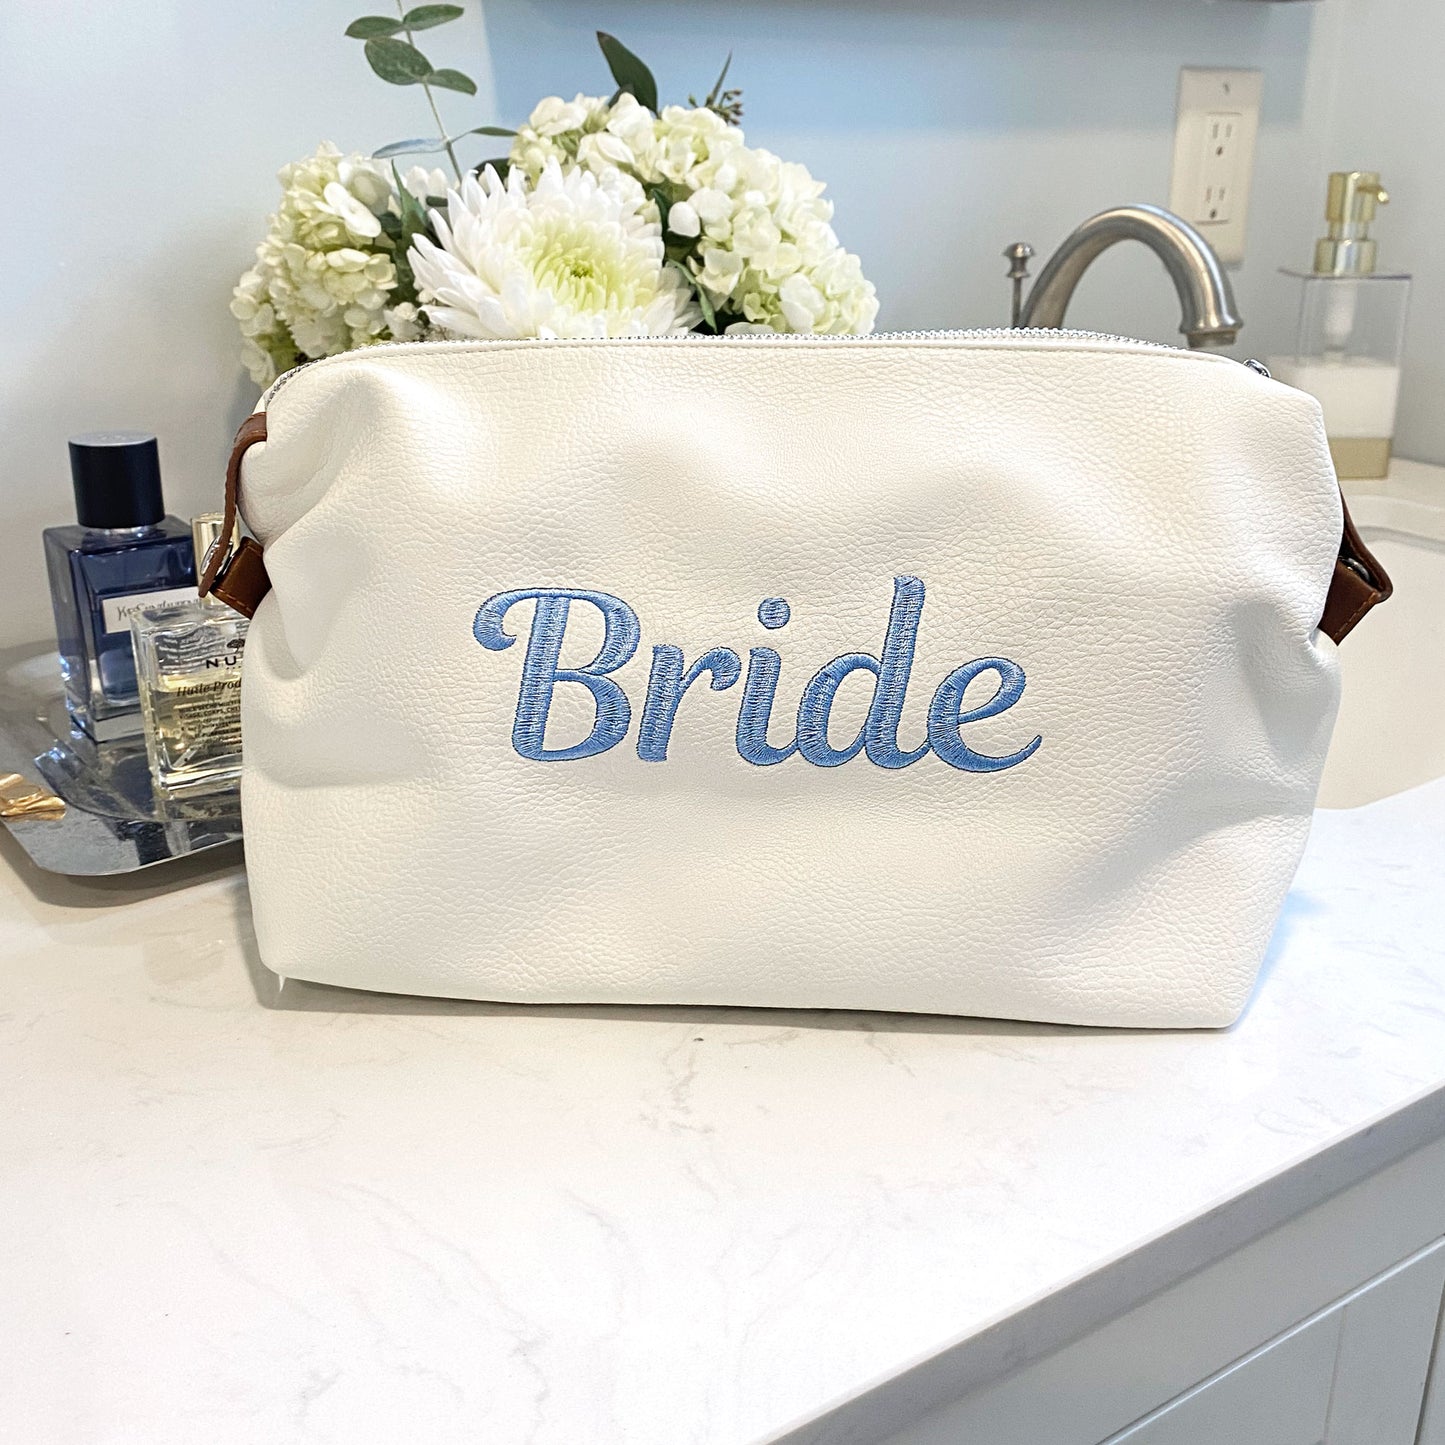 White addison dopp kit with script bride embroidered in baby blue thread on the center of the bag styled on a bathrom counter